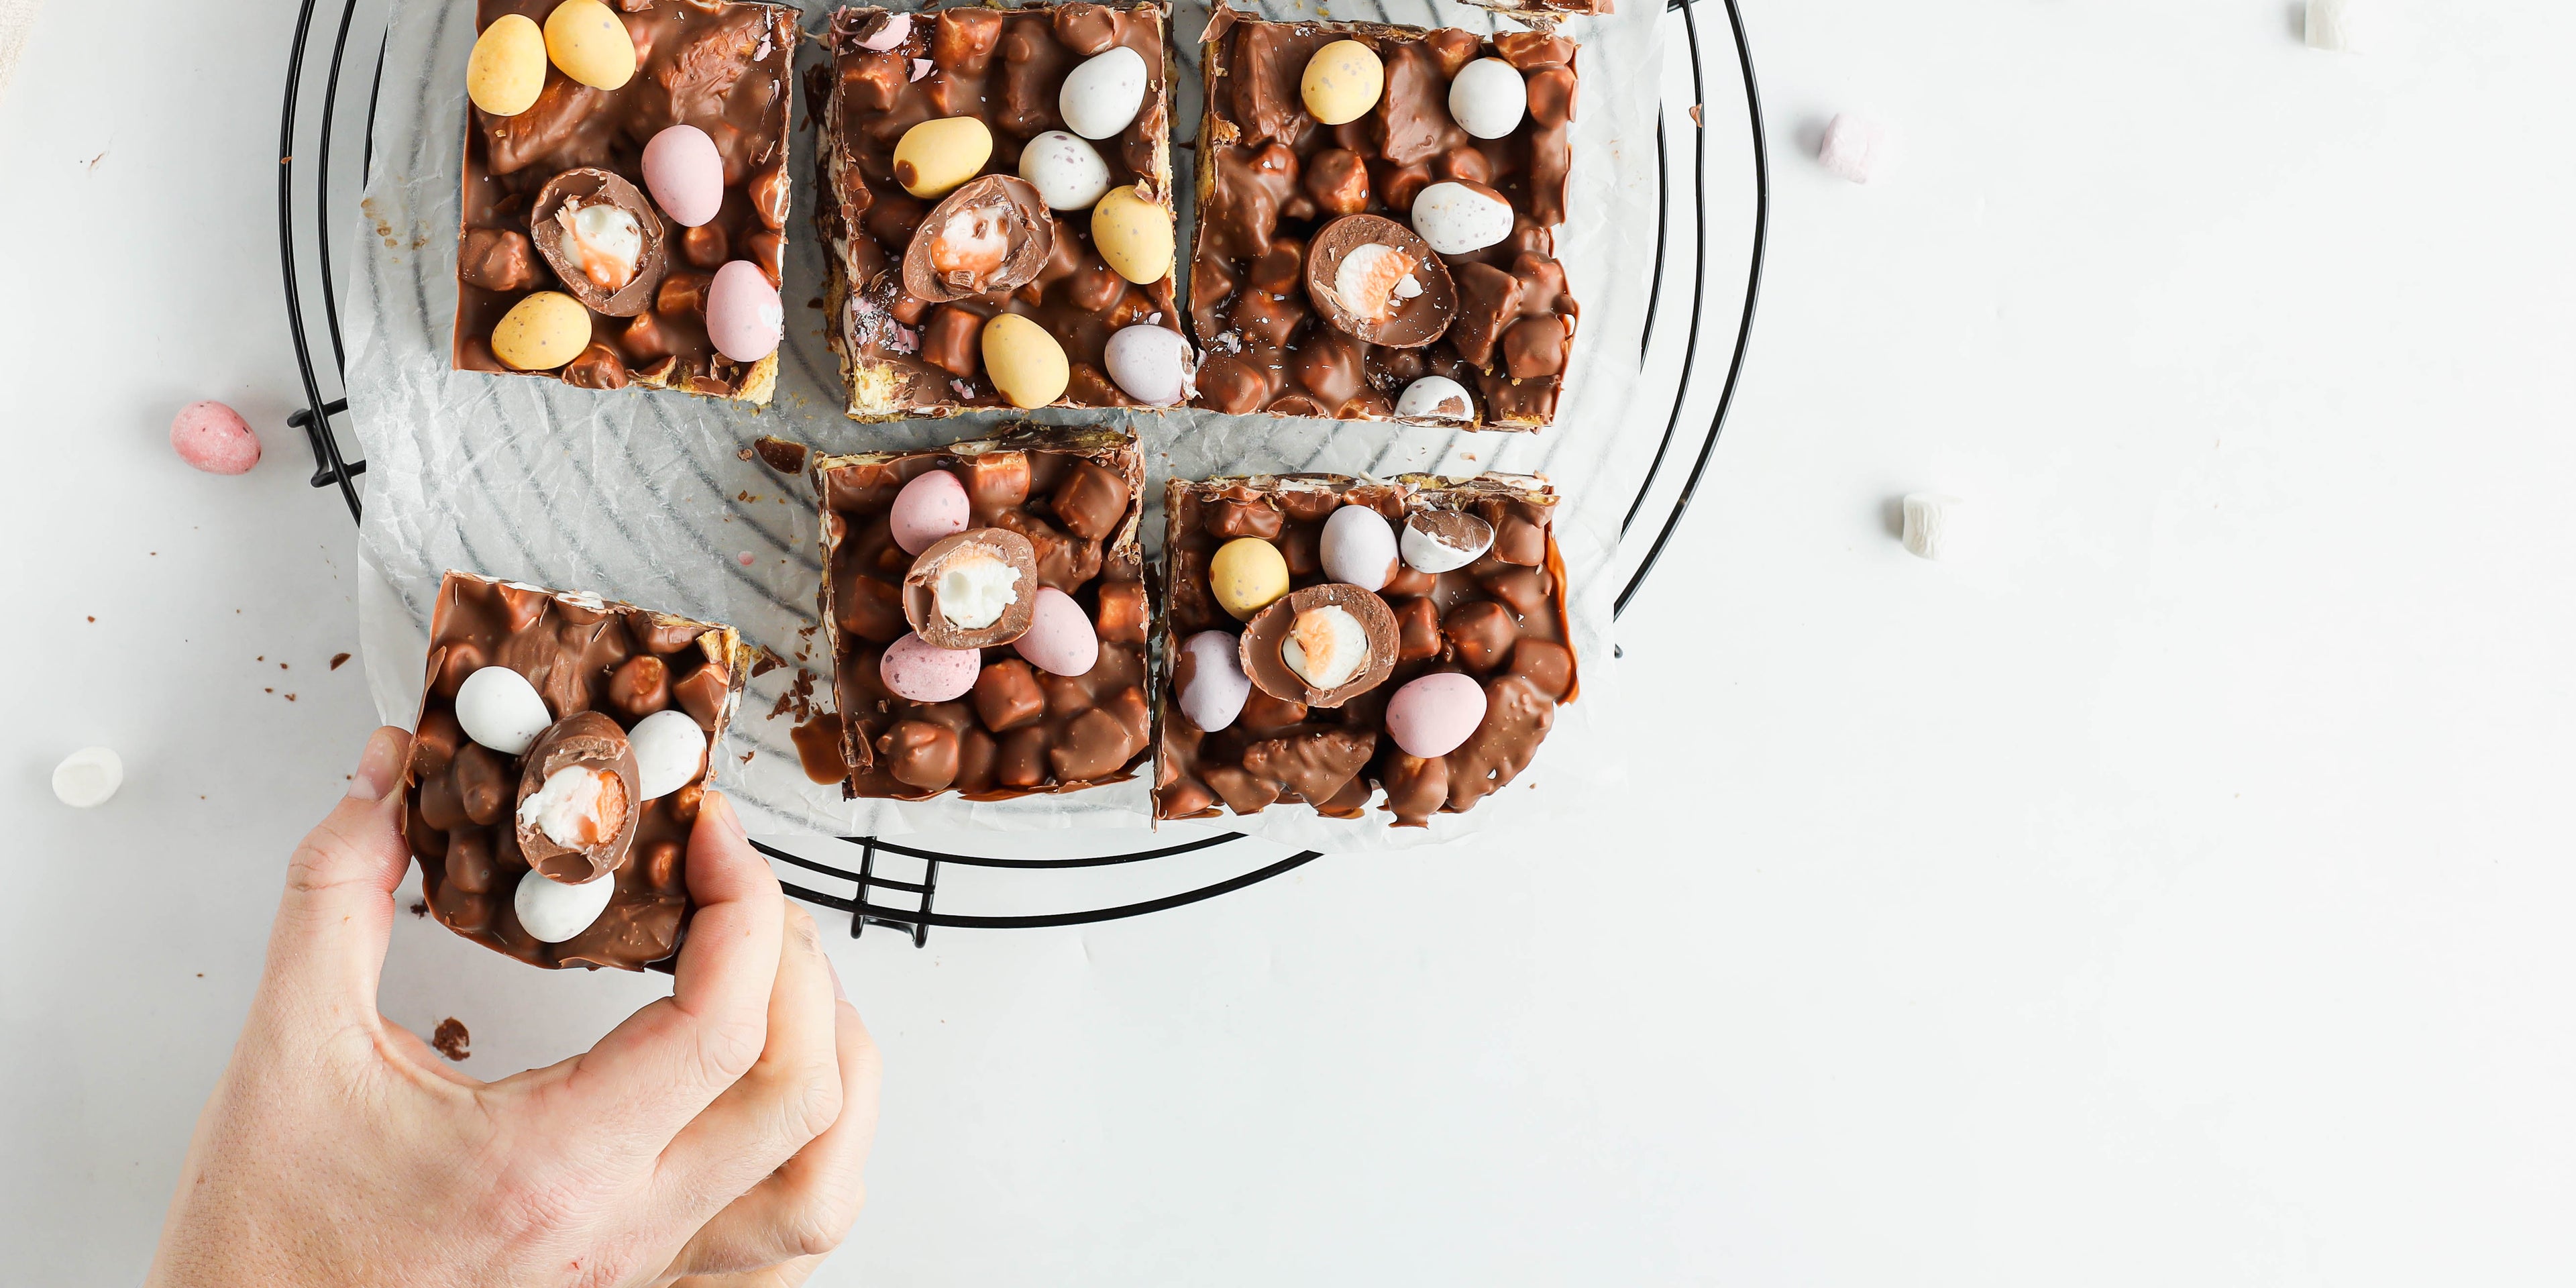 Easter Egg Rocky Road with a hand reaching for a slice, on a wire cooling rack. Topped with creme eggs, mini eggs and marshmallows